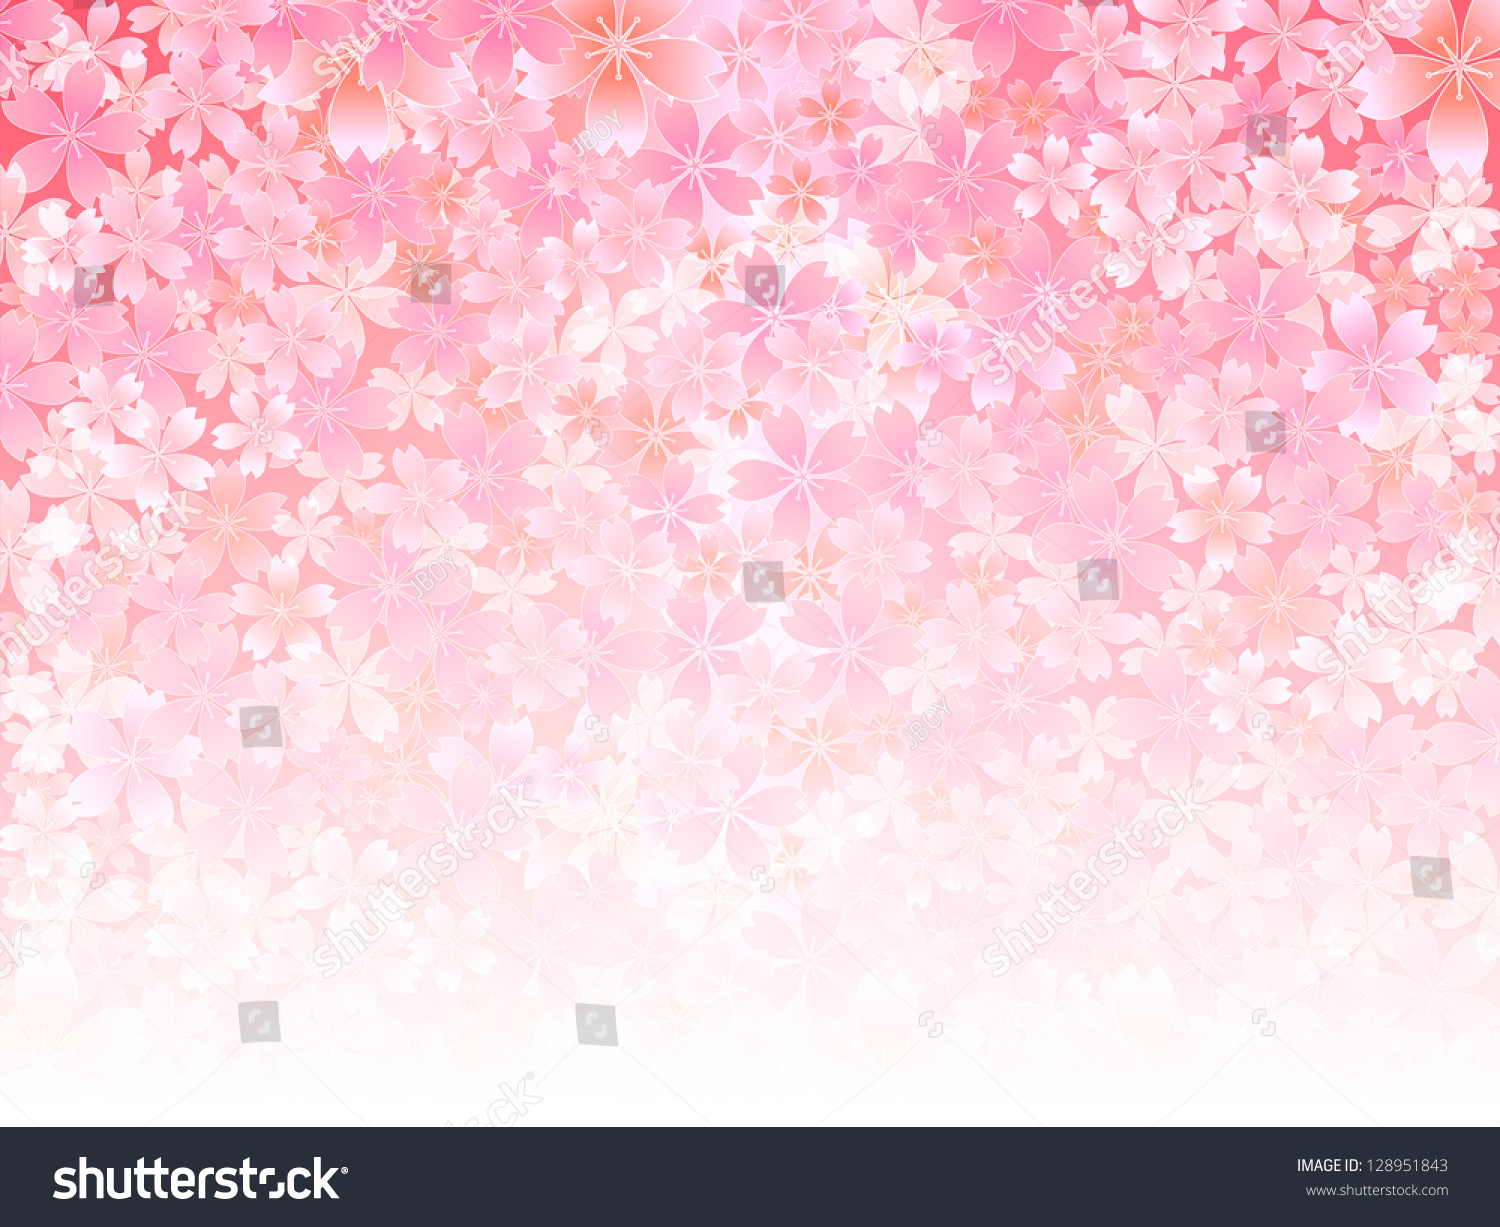 Spring pink cherry blossoms background #128951843